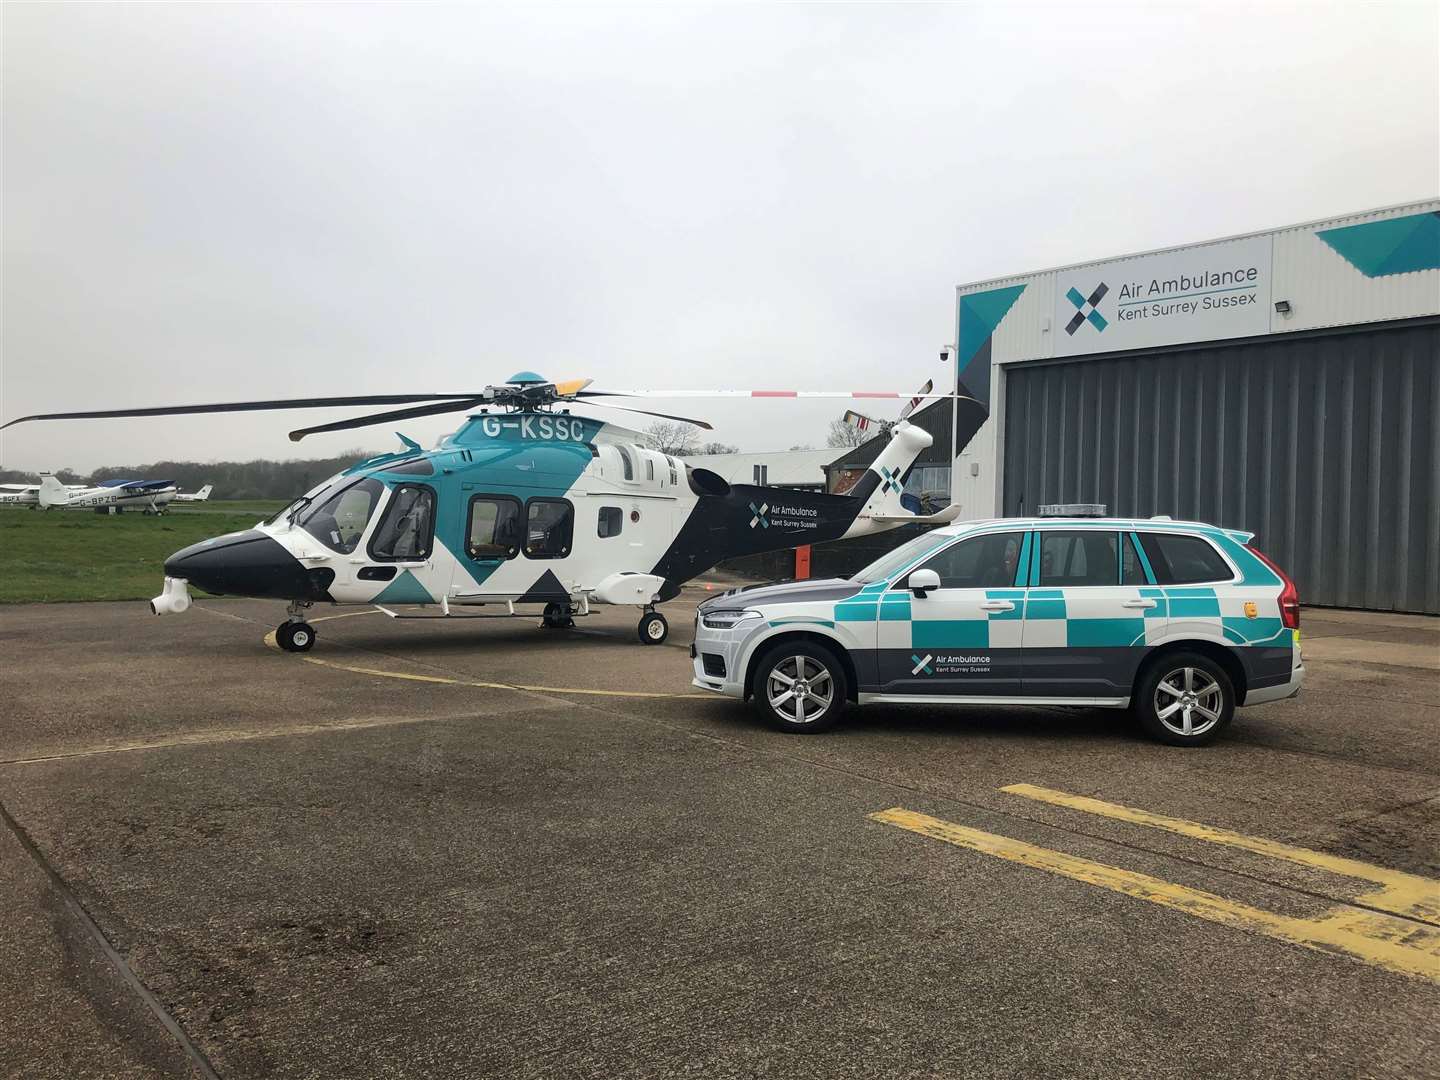 The rapid response vehicles play a vital role when the helicopter can't fly because of bad weather